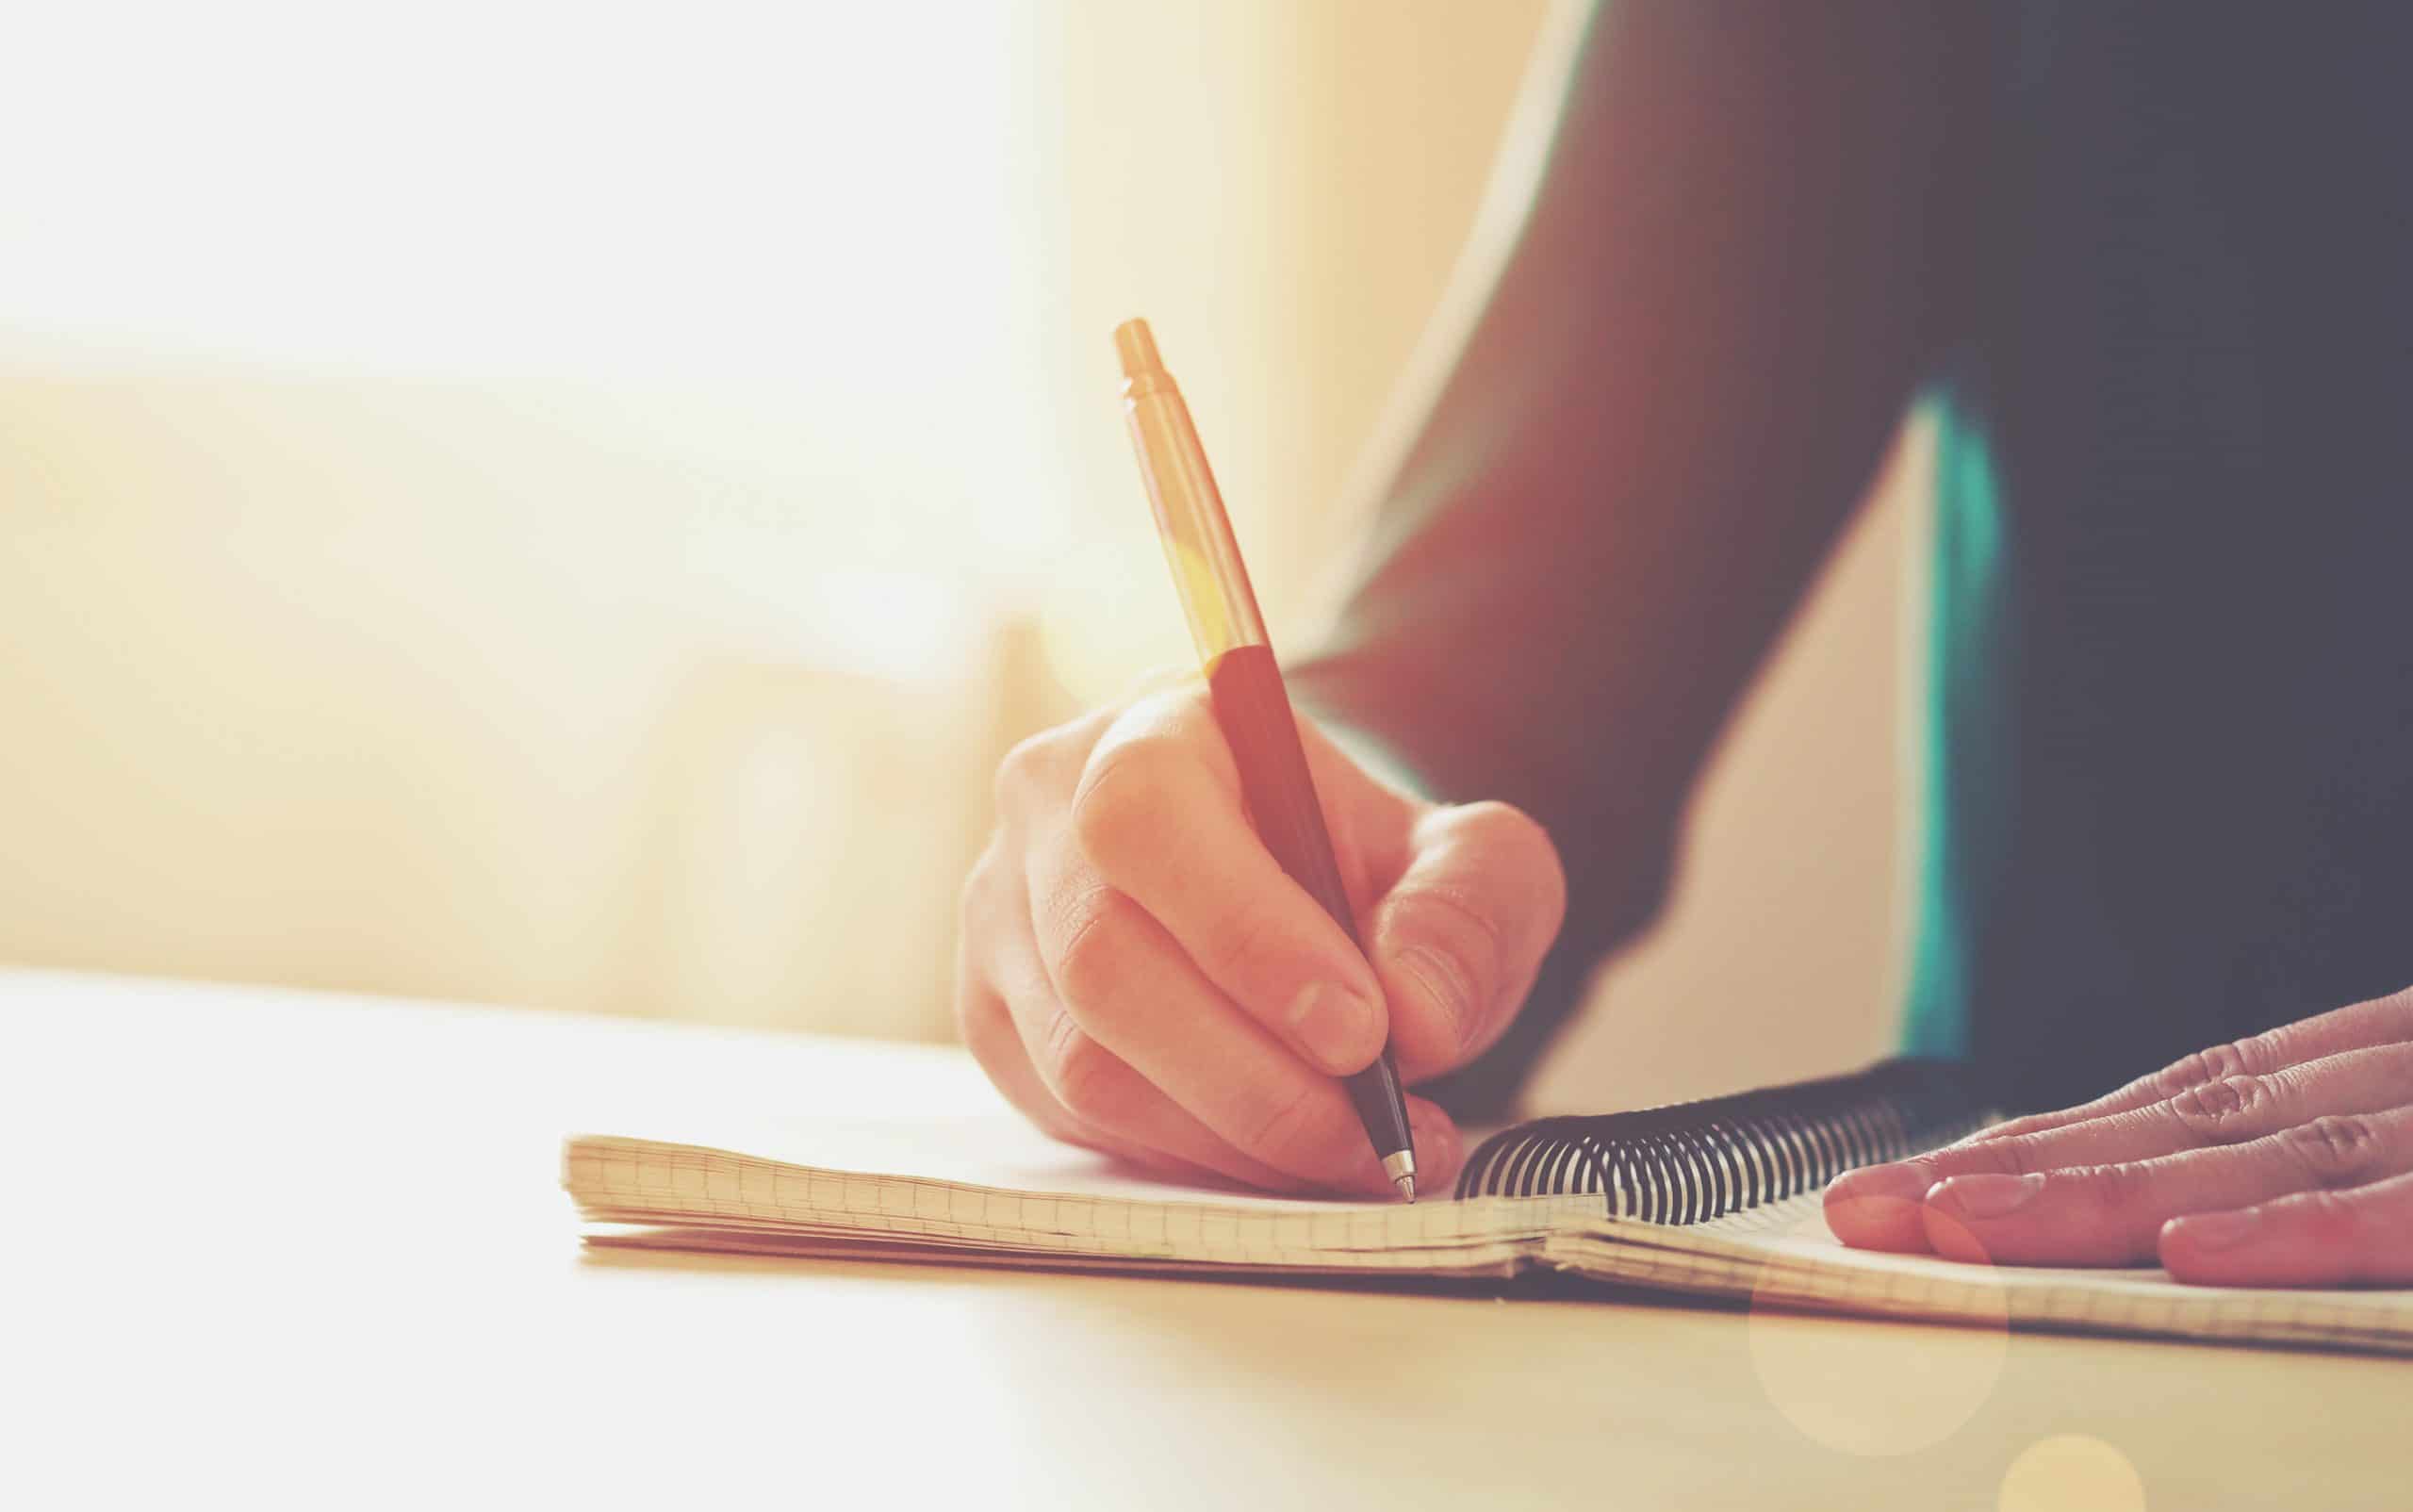 Female hands holding a pen and writing in a notebook.